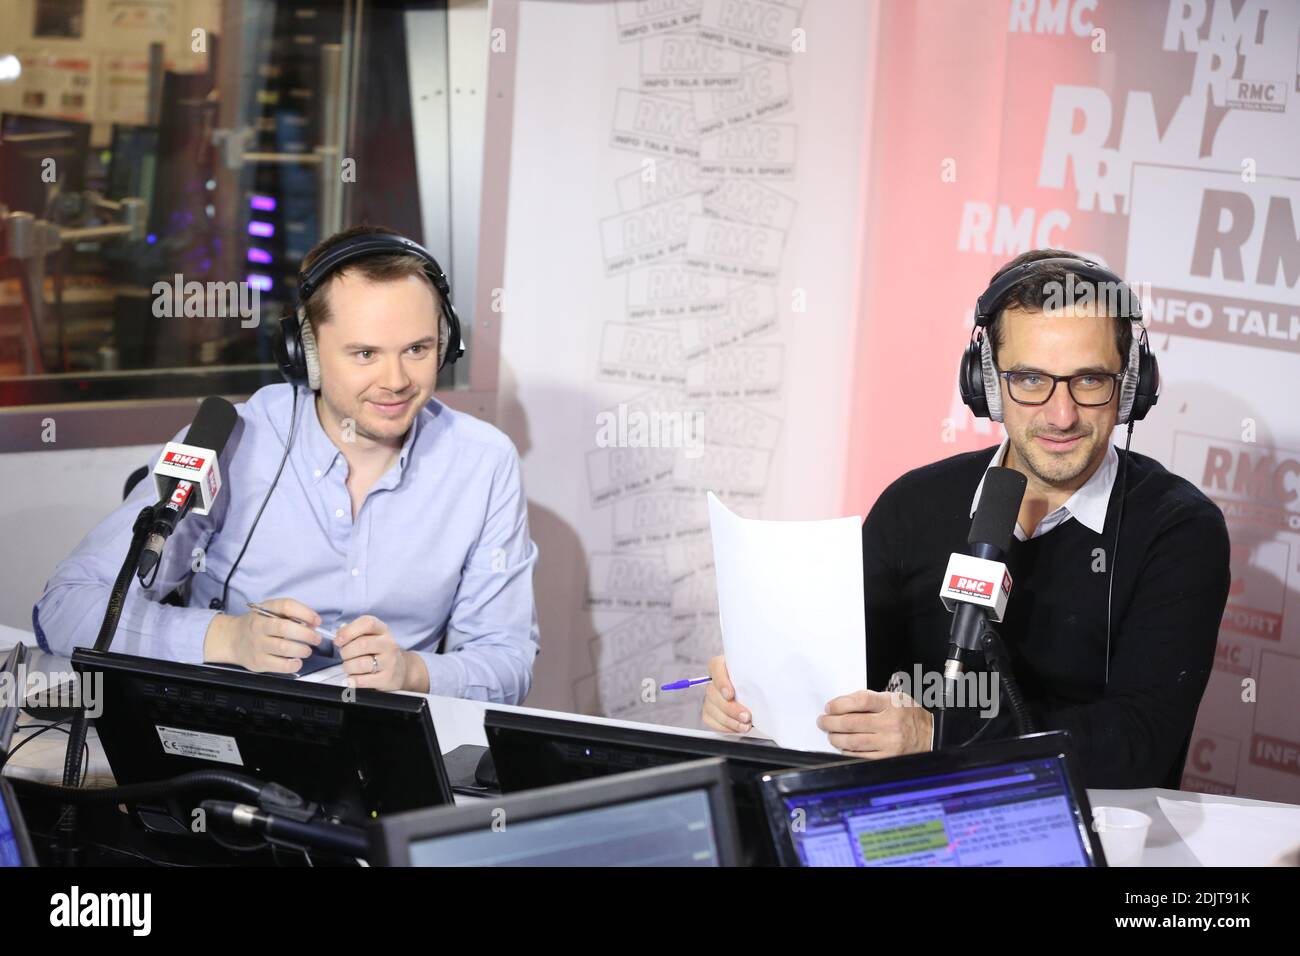 Exclusive - Adrien Aigoin and Pierre Dorian at the 'Super Moscato Show'  talk show on RMC Radio, in Paris, France, on November 07, 2016. Photo by  Jerome Domine/ABACAPRESS.COM Stock Photo - Alamy